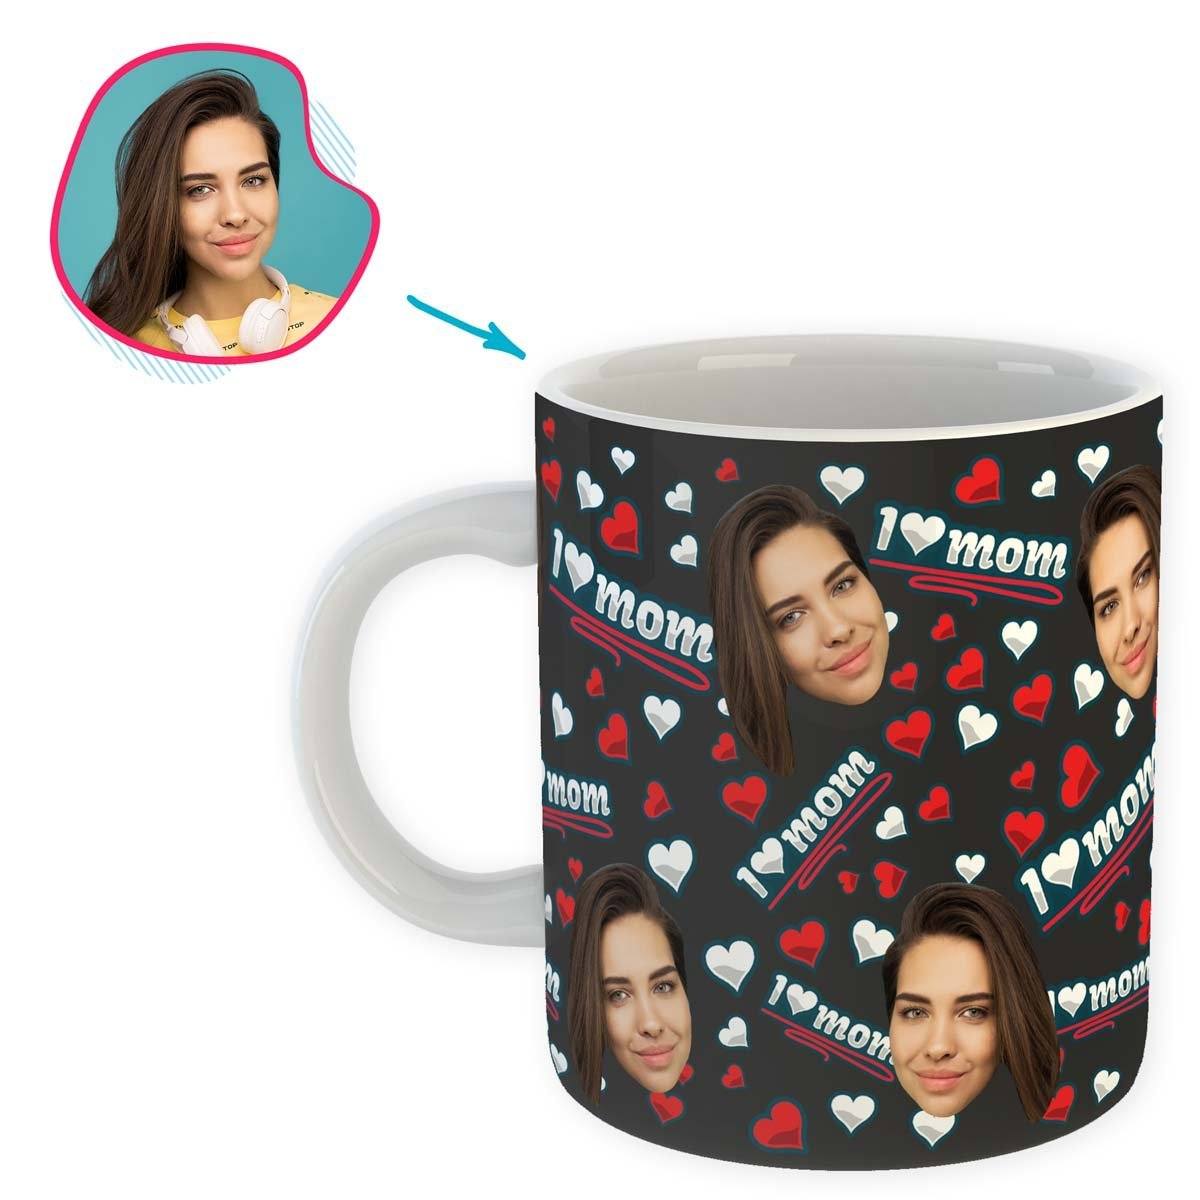 dark Love Mom mug personalized with photo of face printed on it